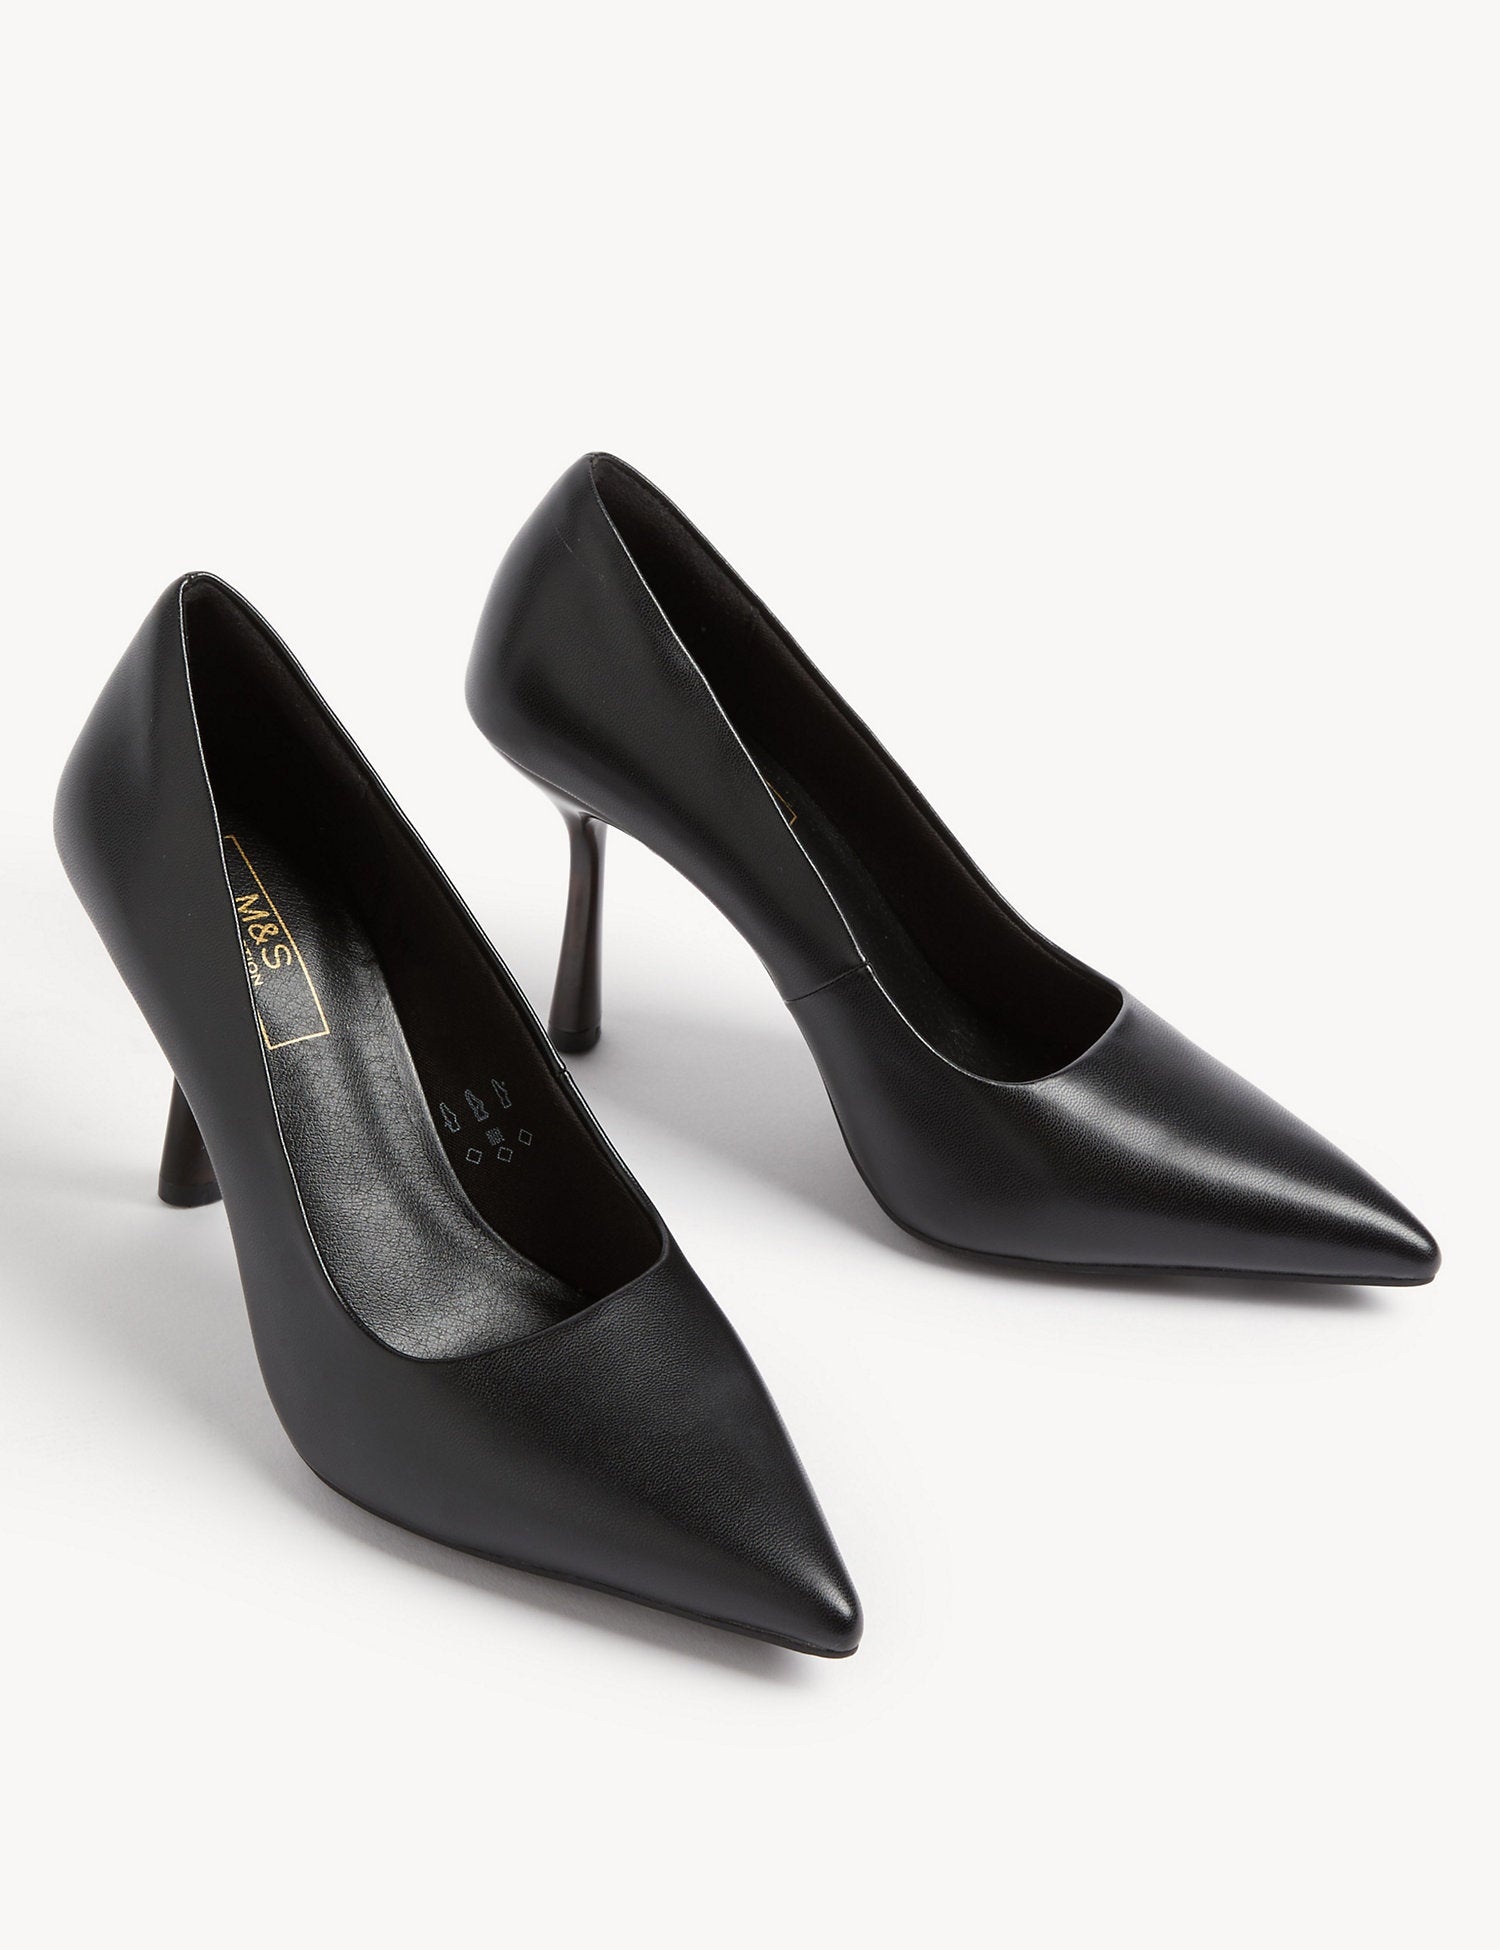 Statement Pointed Court Shoes